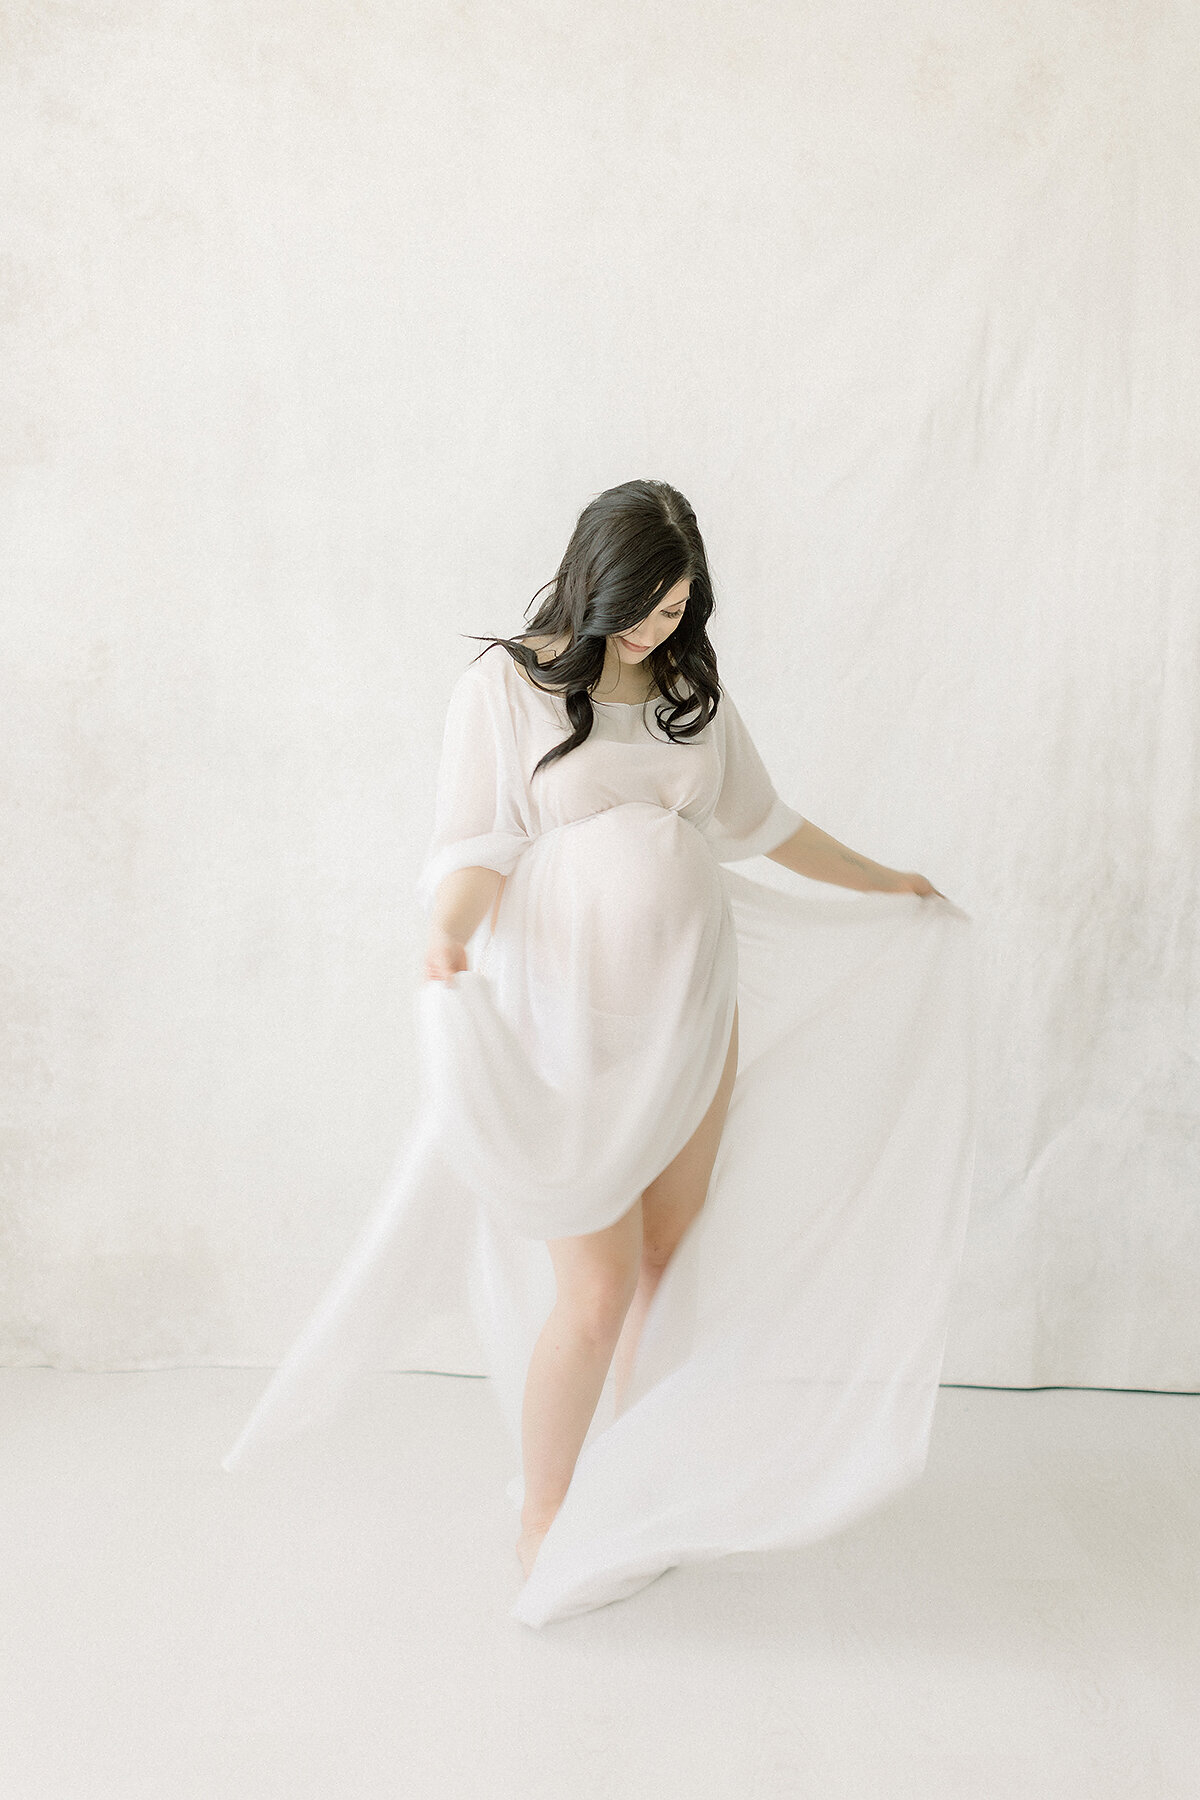 A photo taken for a maternity session in a Dallas/Fort Worth area photography studio of an expecting mother while she is dancing playfully around the studio.